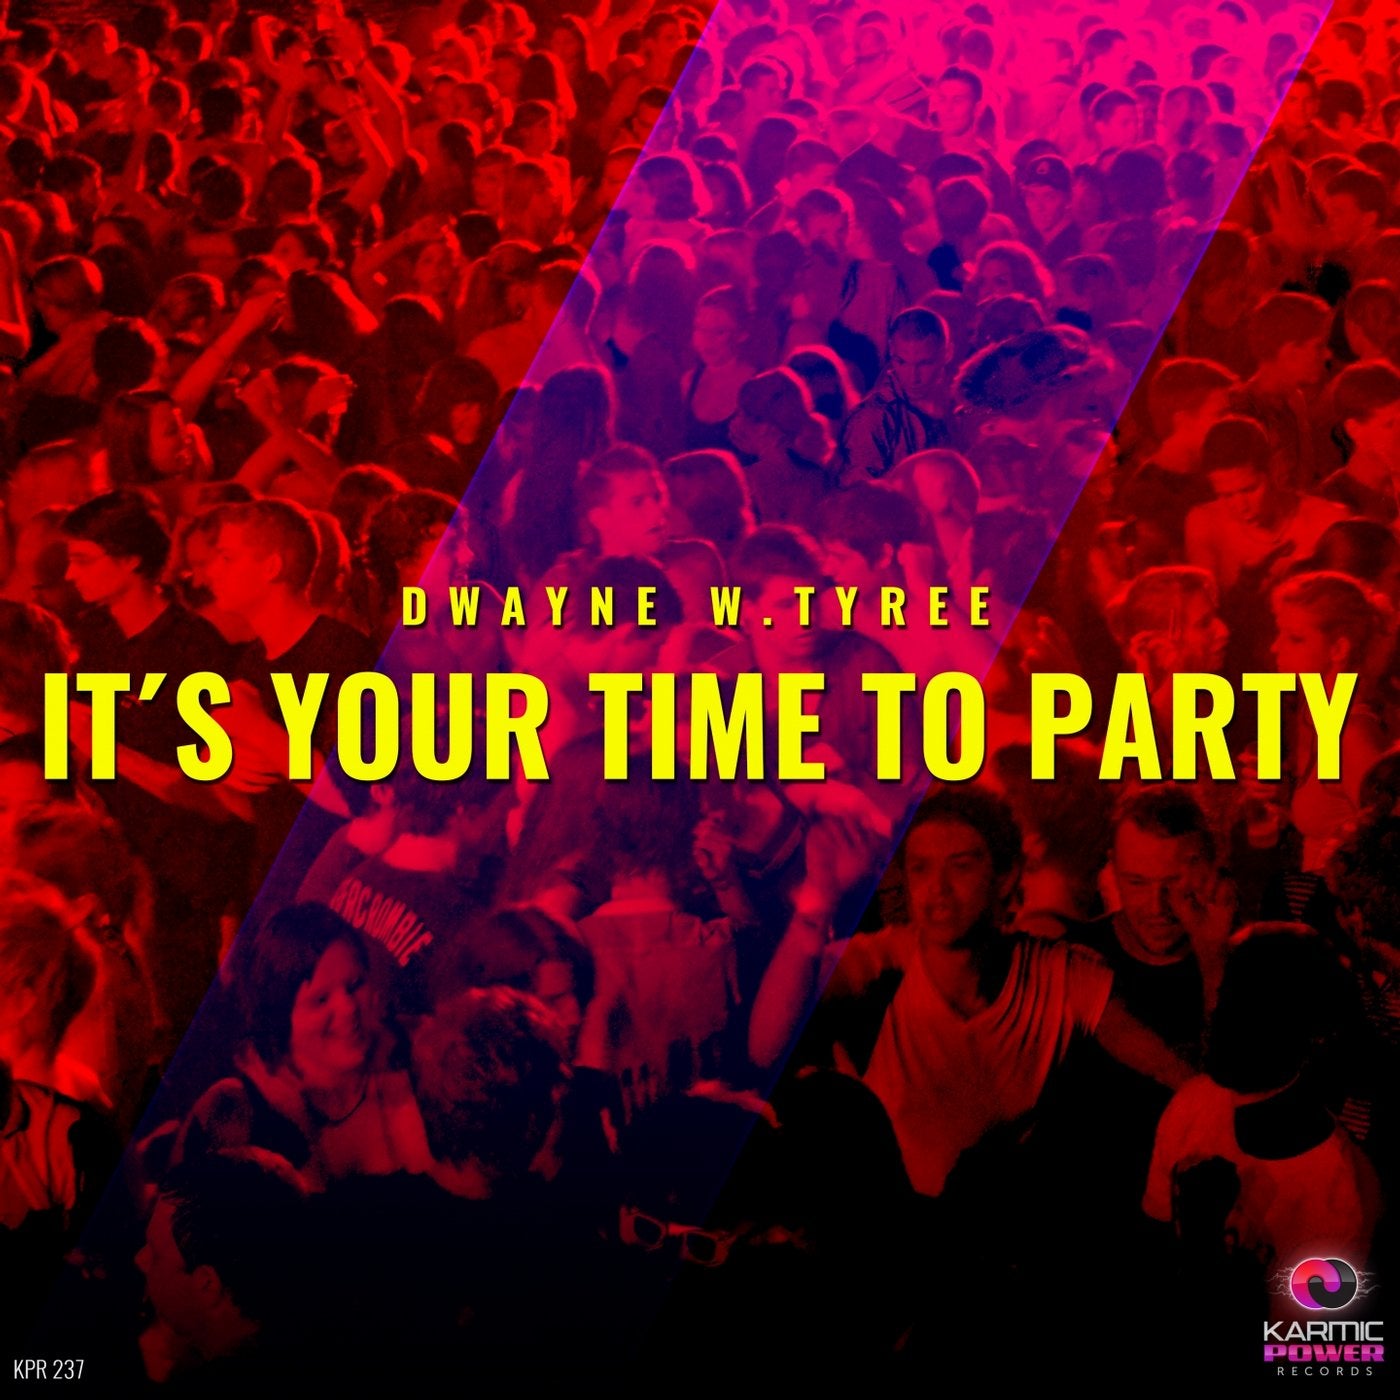 It's Your Time to Party